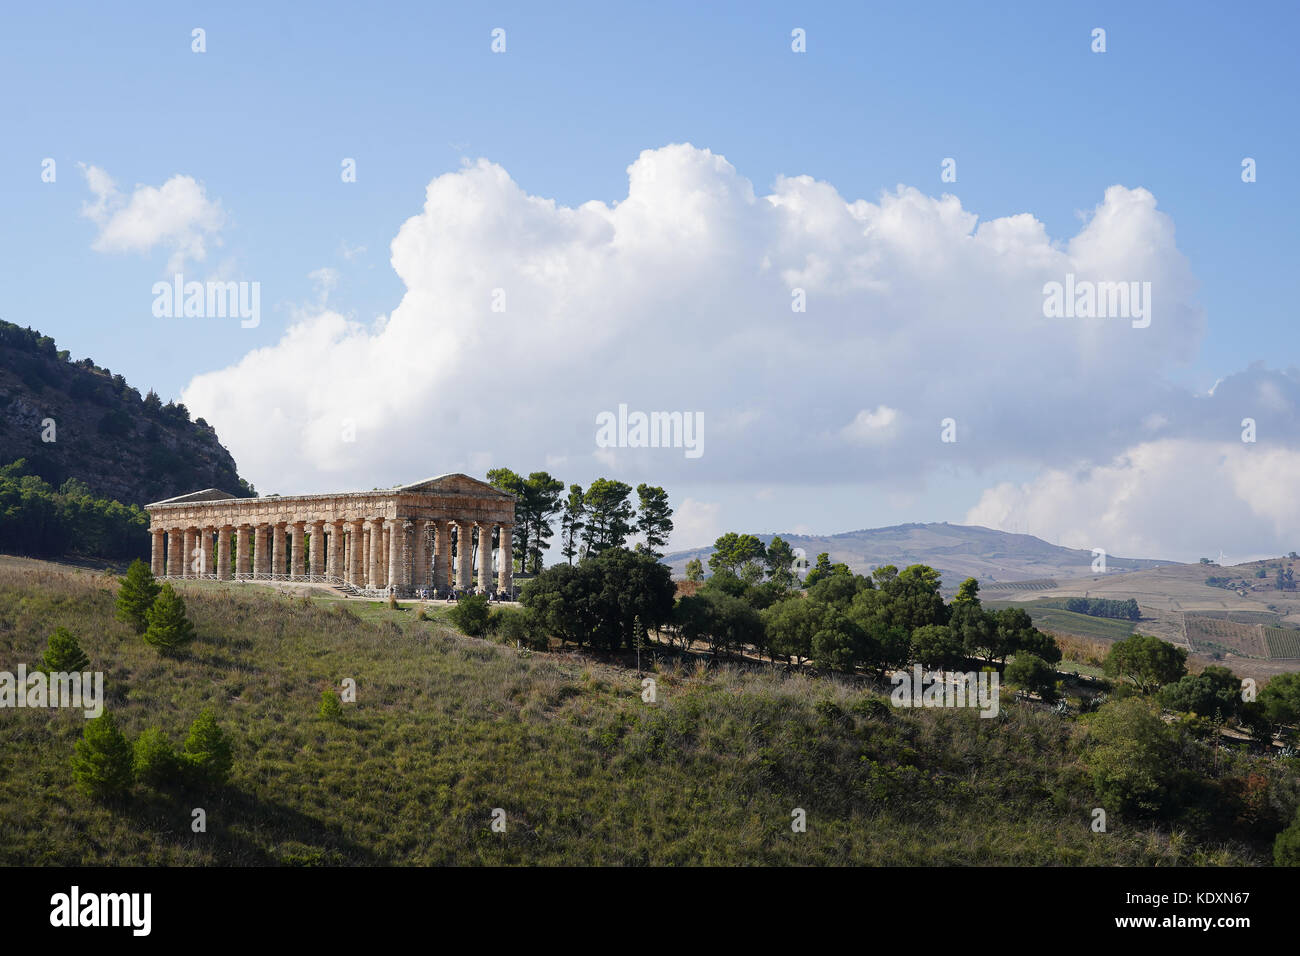 The Greek temple at the historical site of Segesta. From a series of travel photos in Sicily, Italy. Photo date: Saturday, September 30, 2017. Photo c Stock Photo